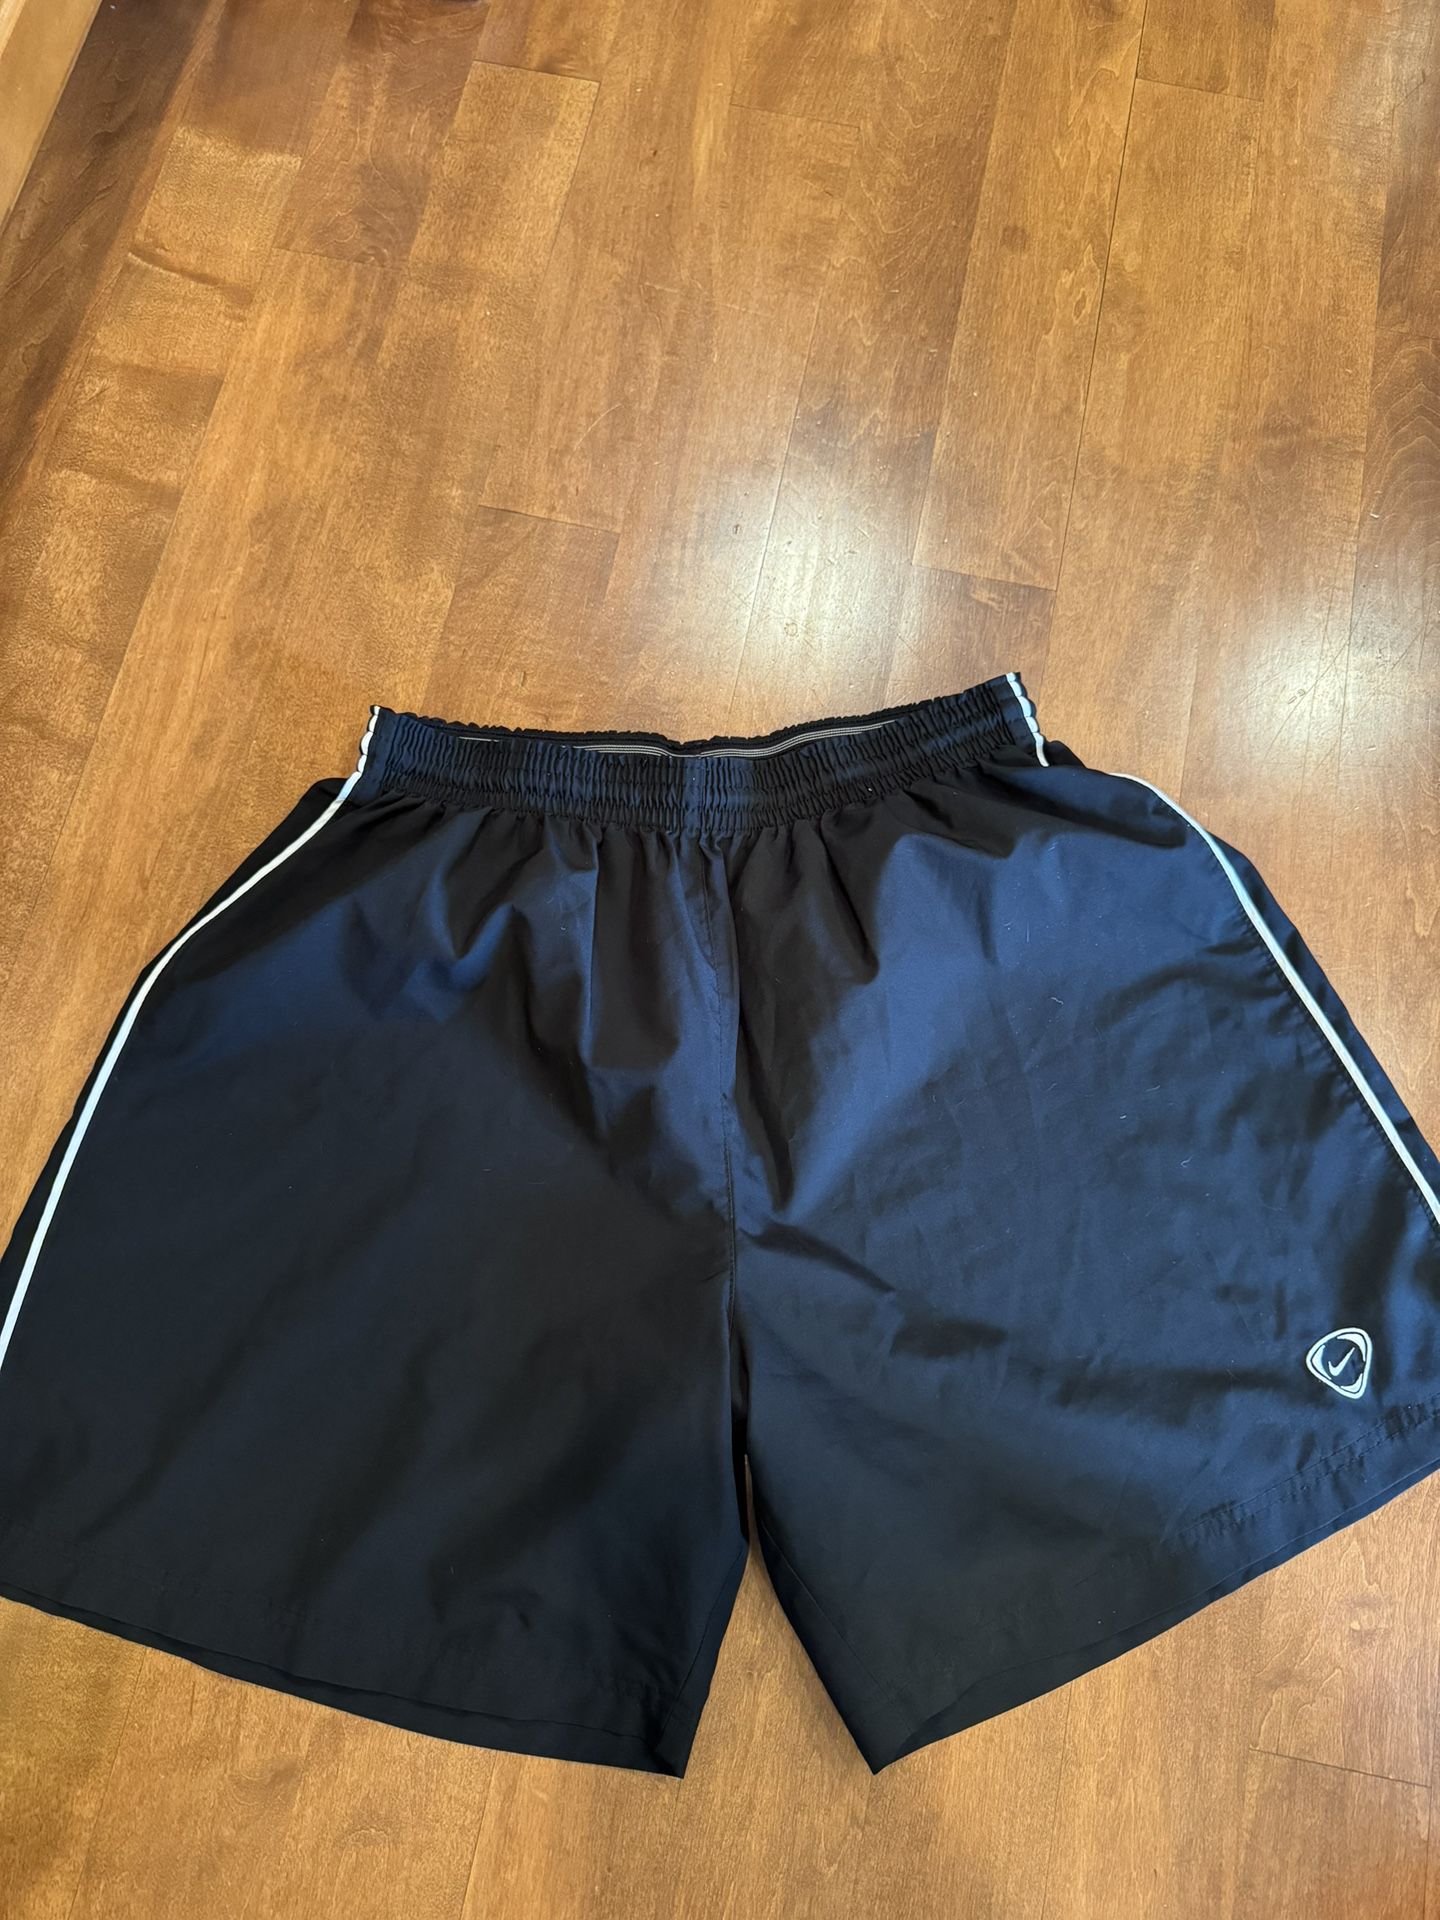 Men’s Nike Athletic Shorts Shipping Available